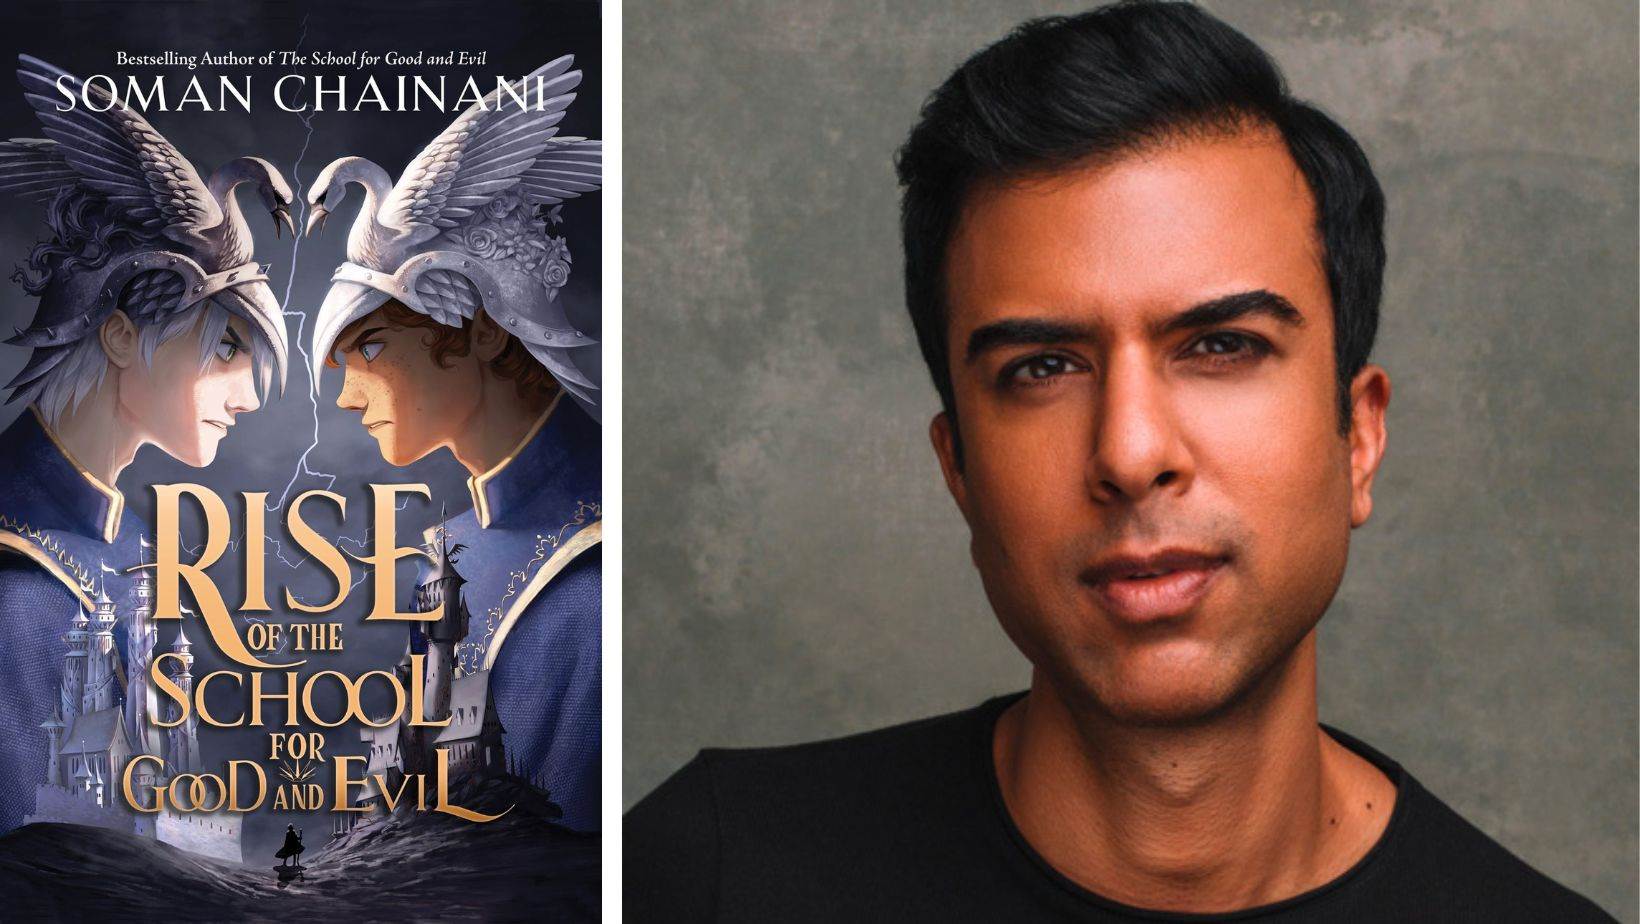 Author Soman Chainani and the cover of Rise of the School for Good and Evil